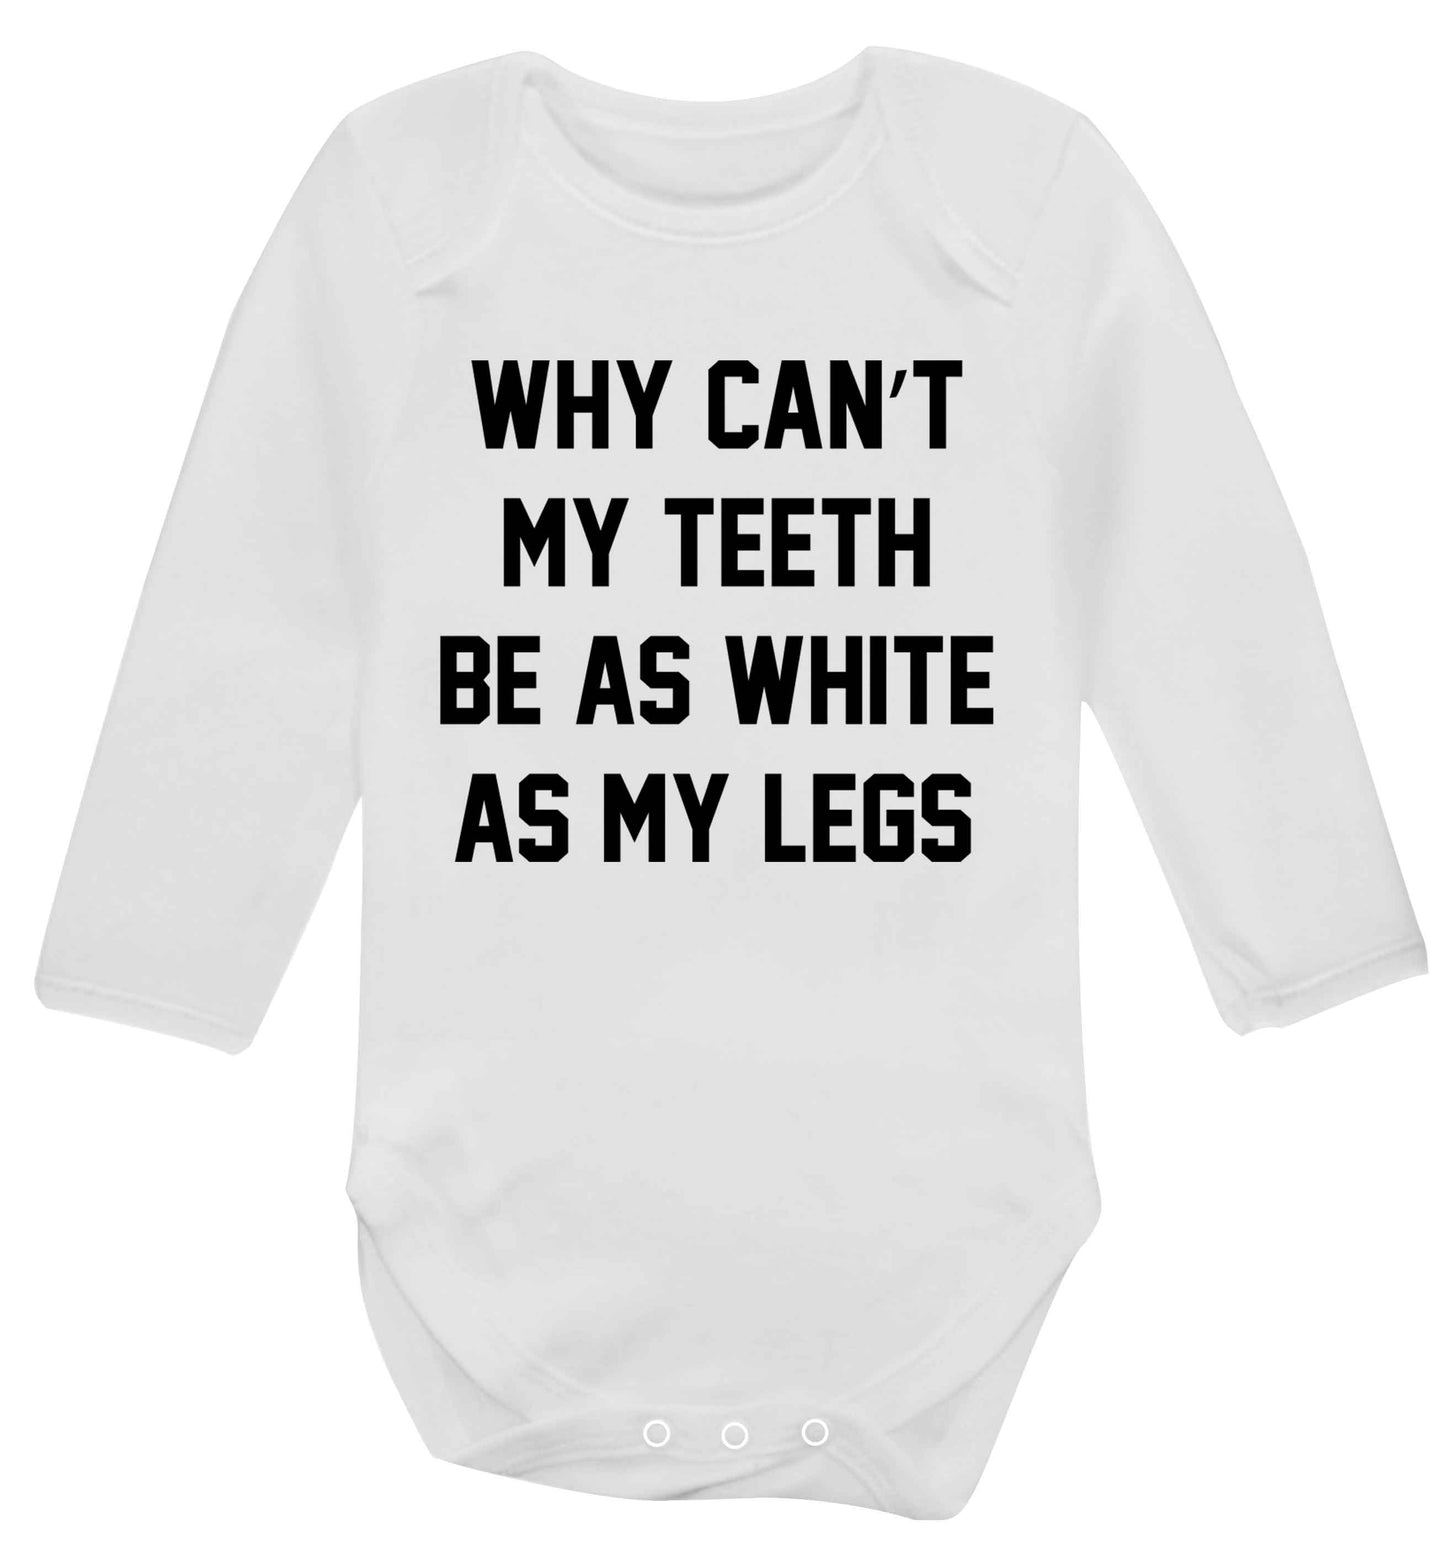 Why can't my teeth be as white as my legs Baby Vest long sleeved white 6-12 months